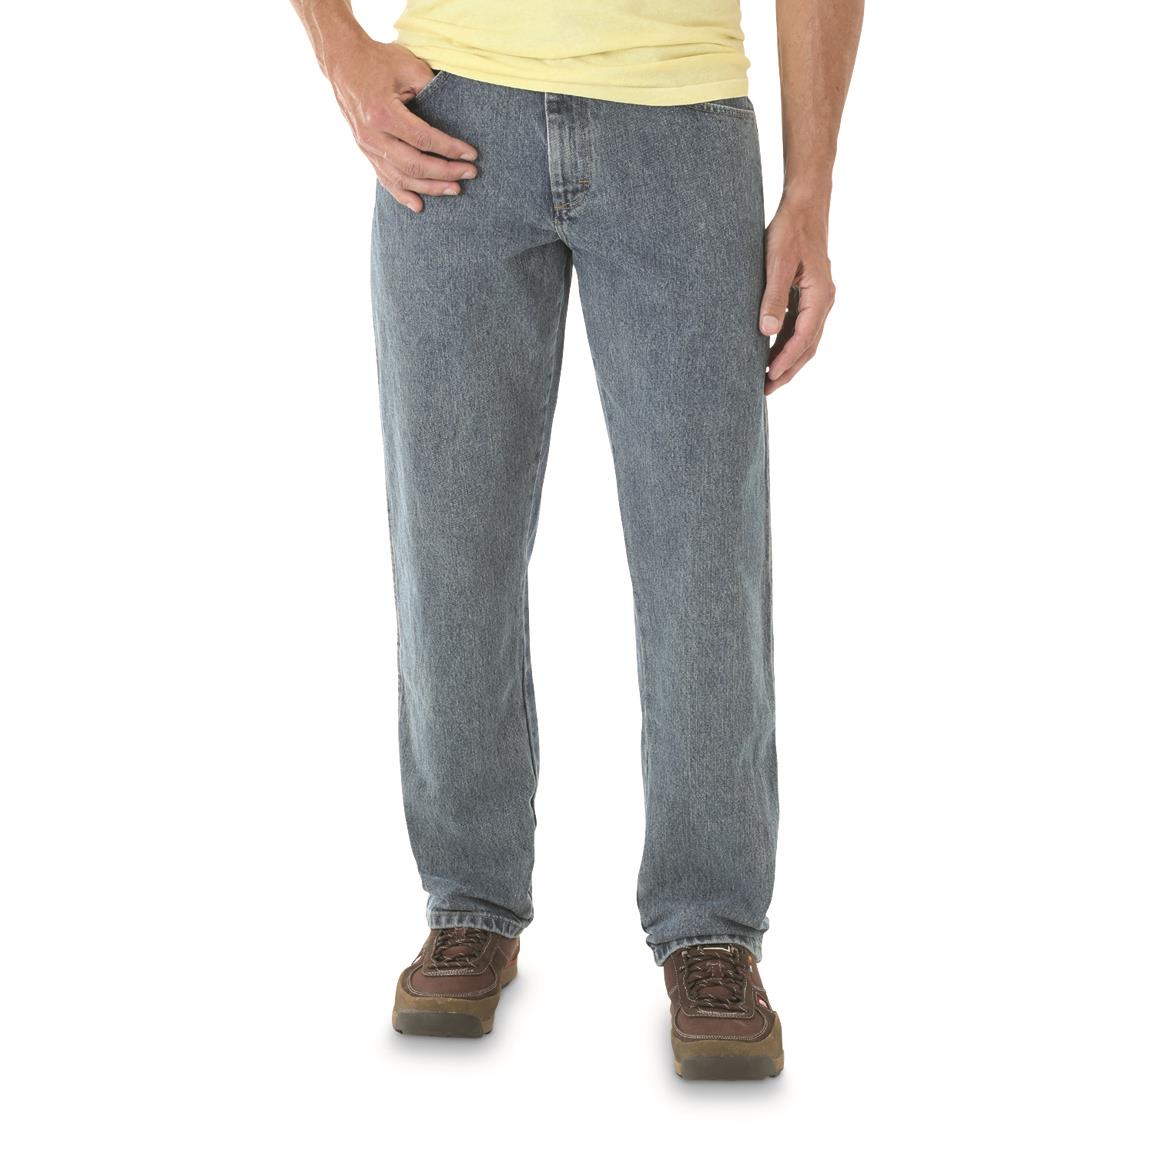 Mens Wrangler Relaxed Fit Jeans | Sportsman's Guide